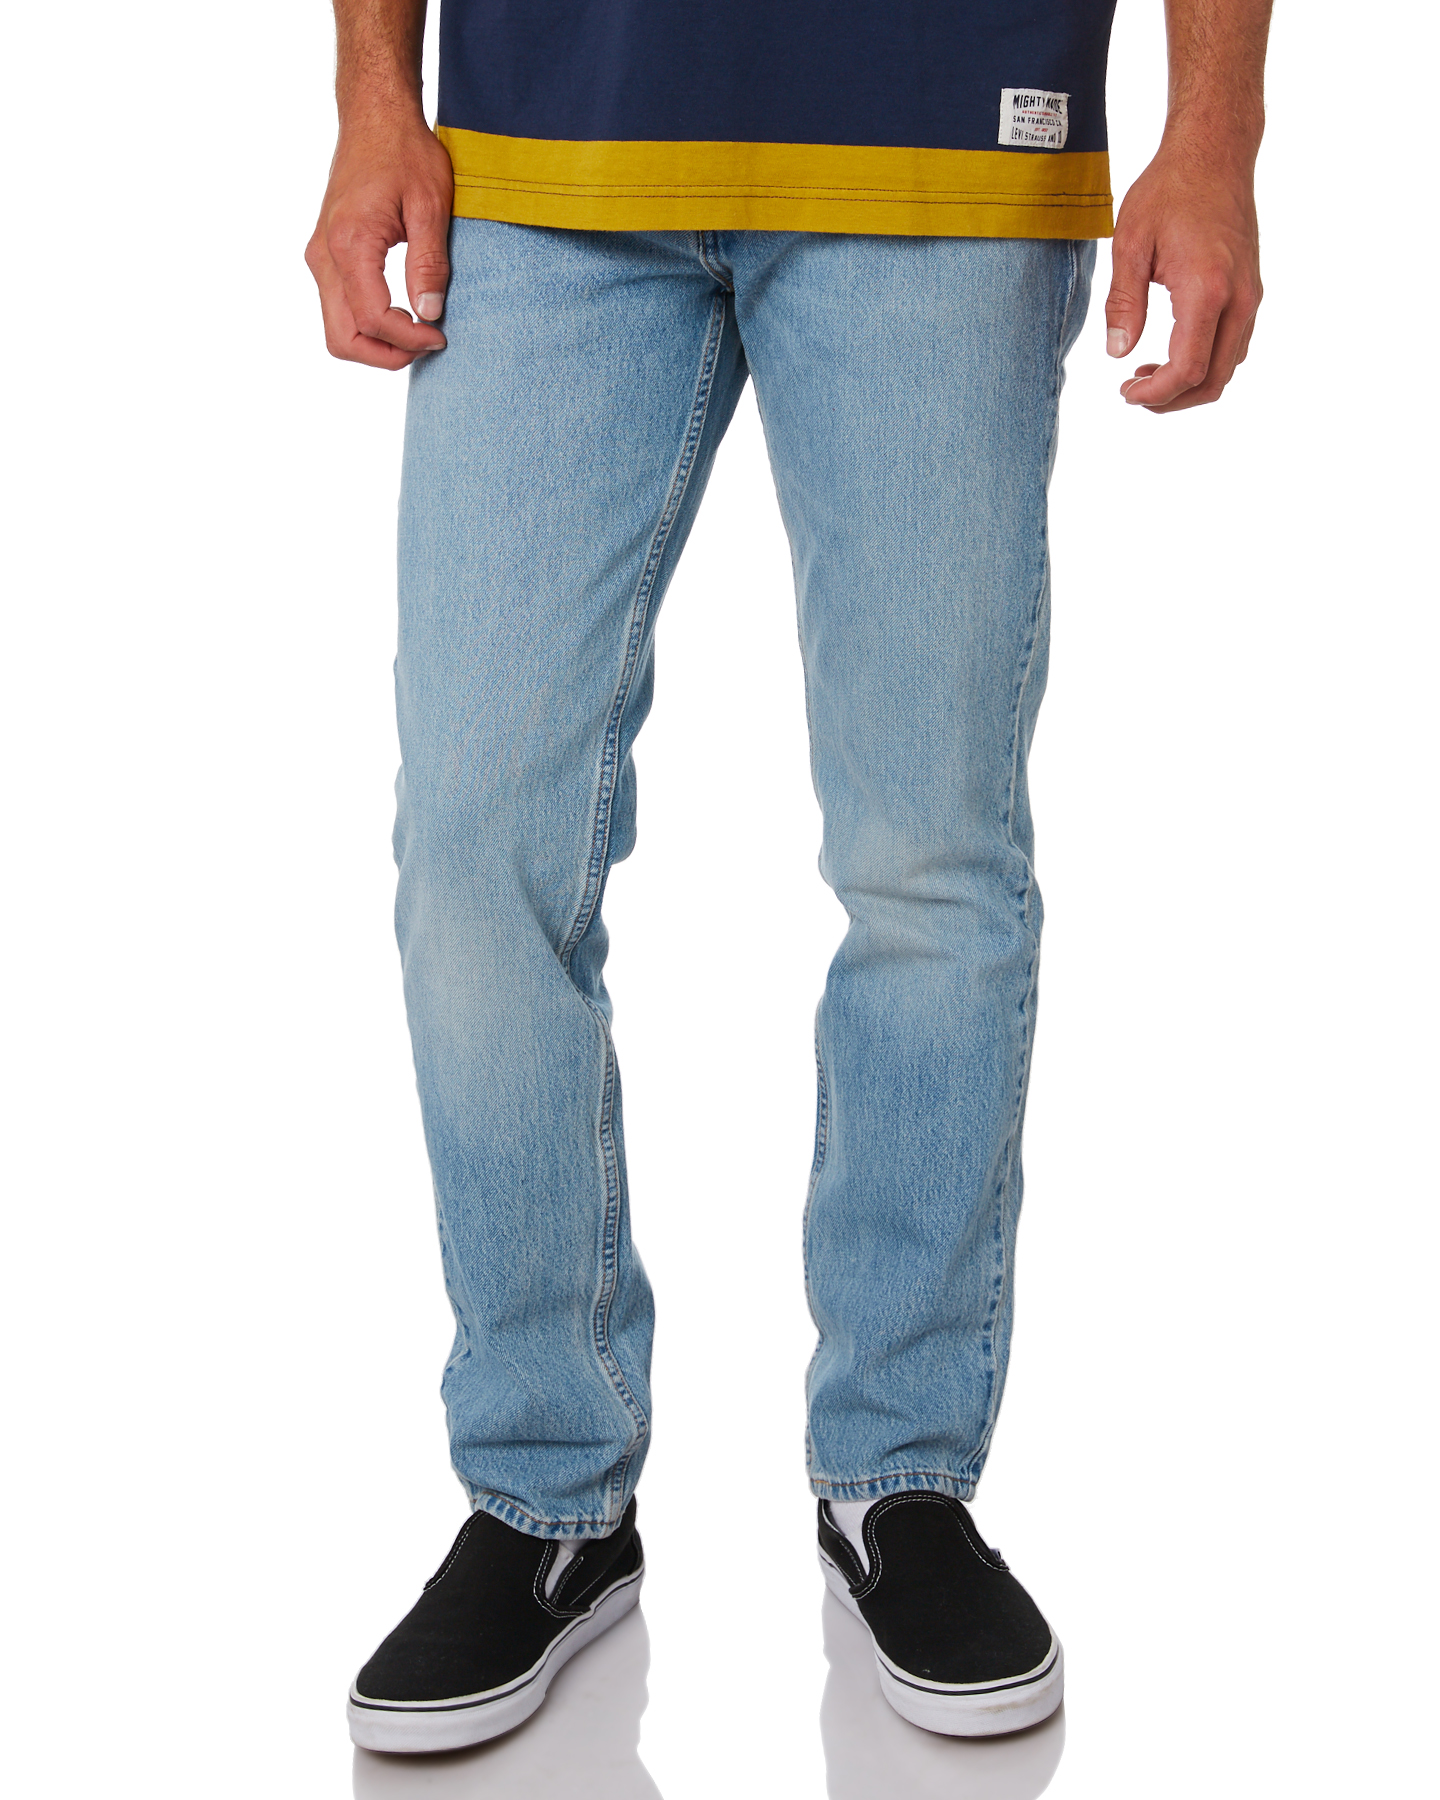 Levi's 511 Slim Fit Mens Jean - The Witch Is Dead | SurfStitch